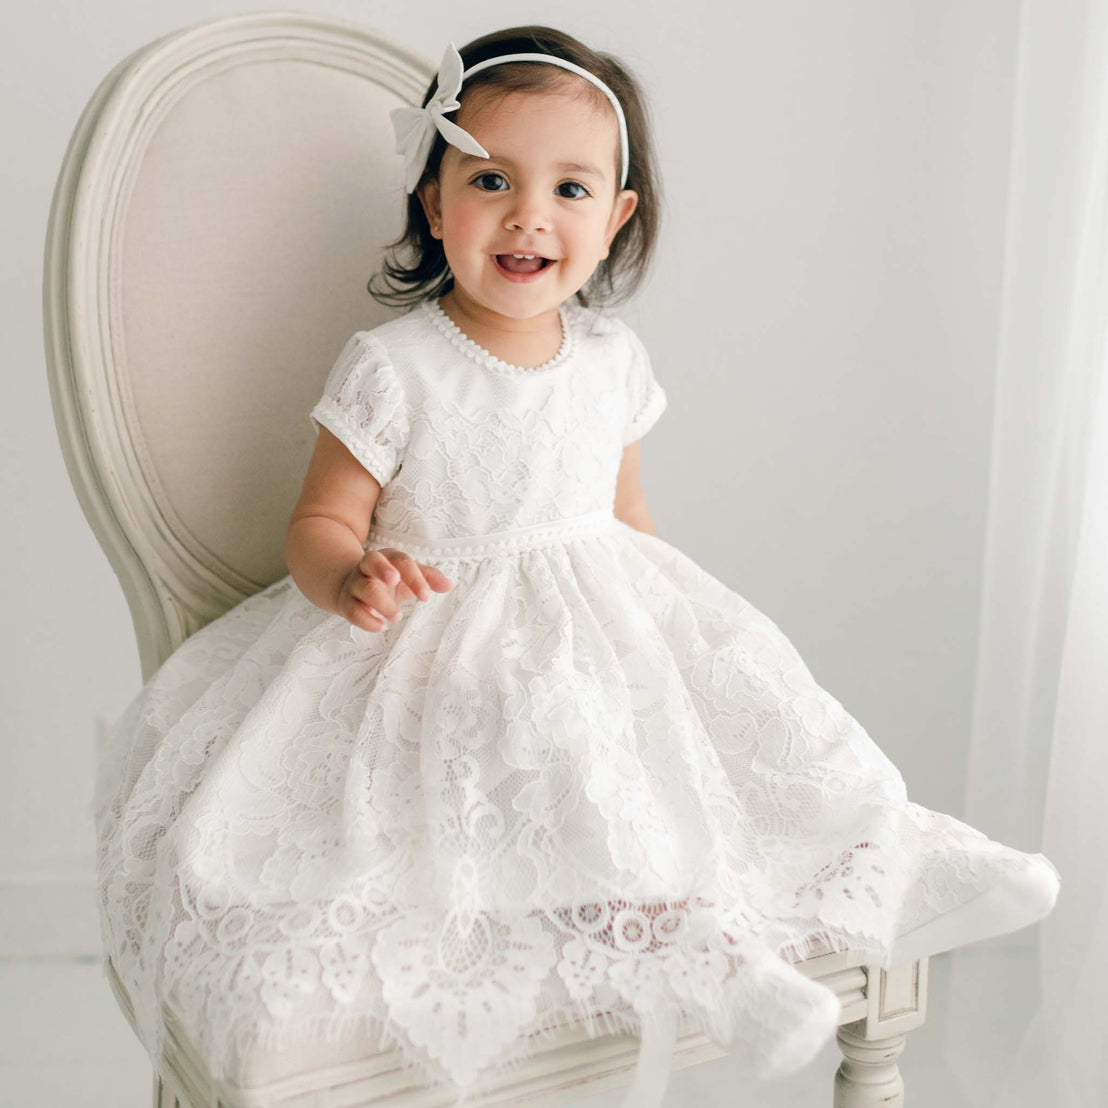 Baby girl wearing the ivory Victoria Puff Sleeve Christening Dress and Victoria Silk Bow Headband. The dress is made from an embroidered ivory lace over an ivory silk Dupioni embroidered lace.